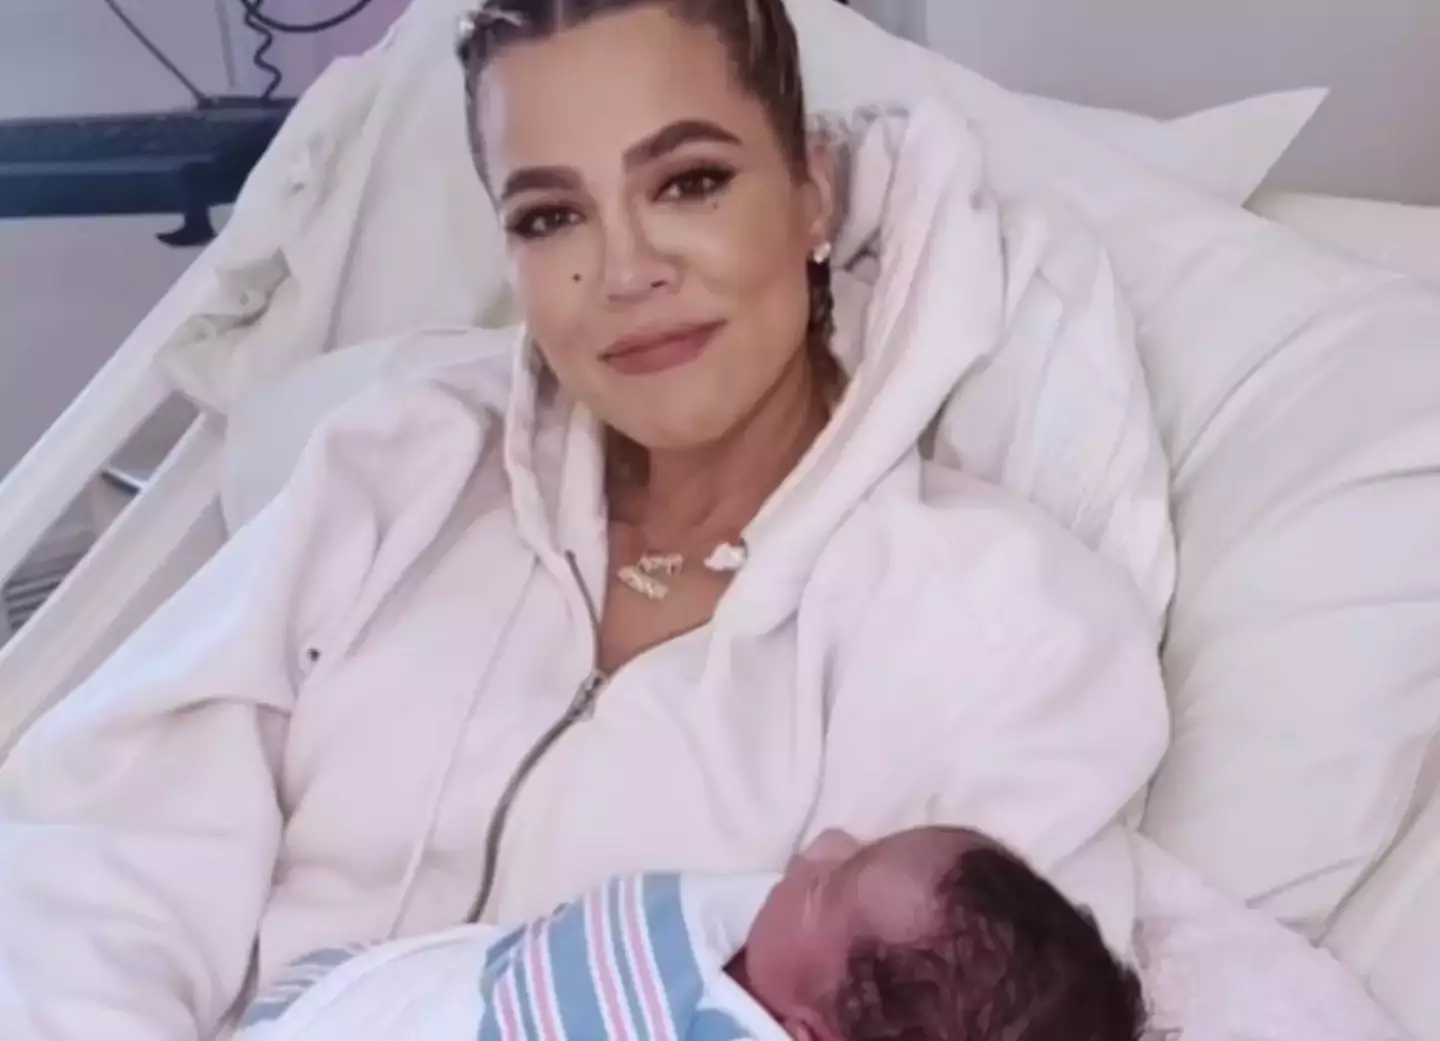 Khloe Kardashian appears to finally reveal her son’s name nearly a year after he was born.